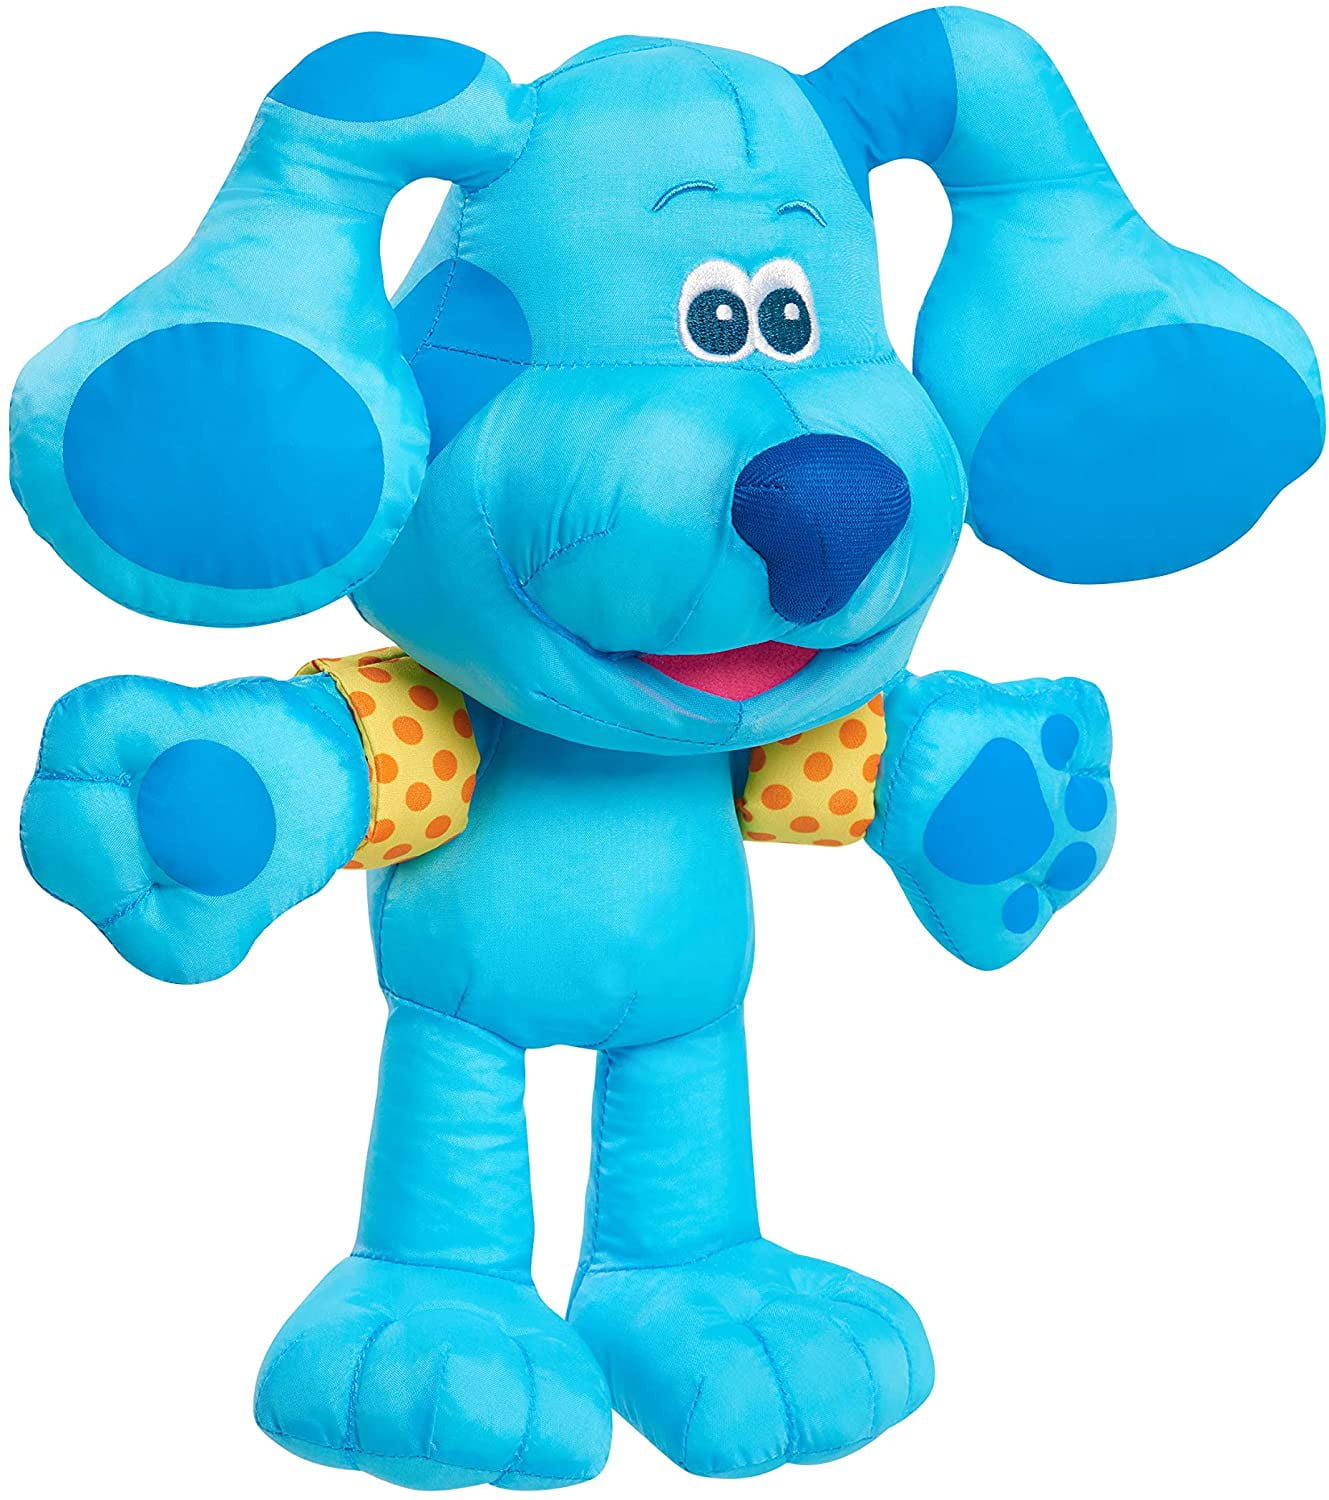 Blue’s Clues & You ARRIVES BY CHRISTMAS! Peek-A-Blue10-inch Interactive Puppy